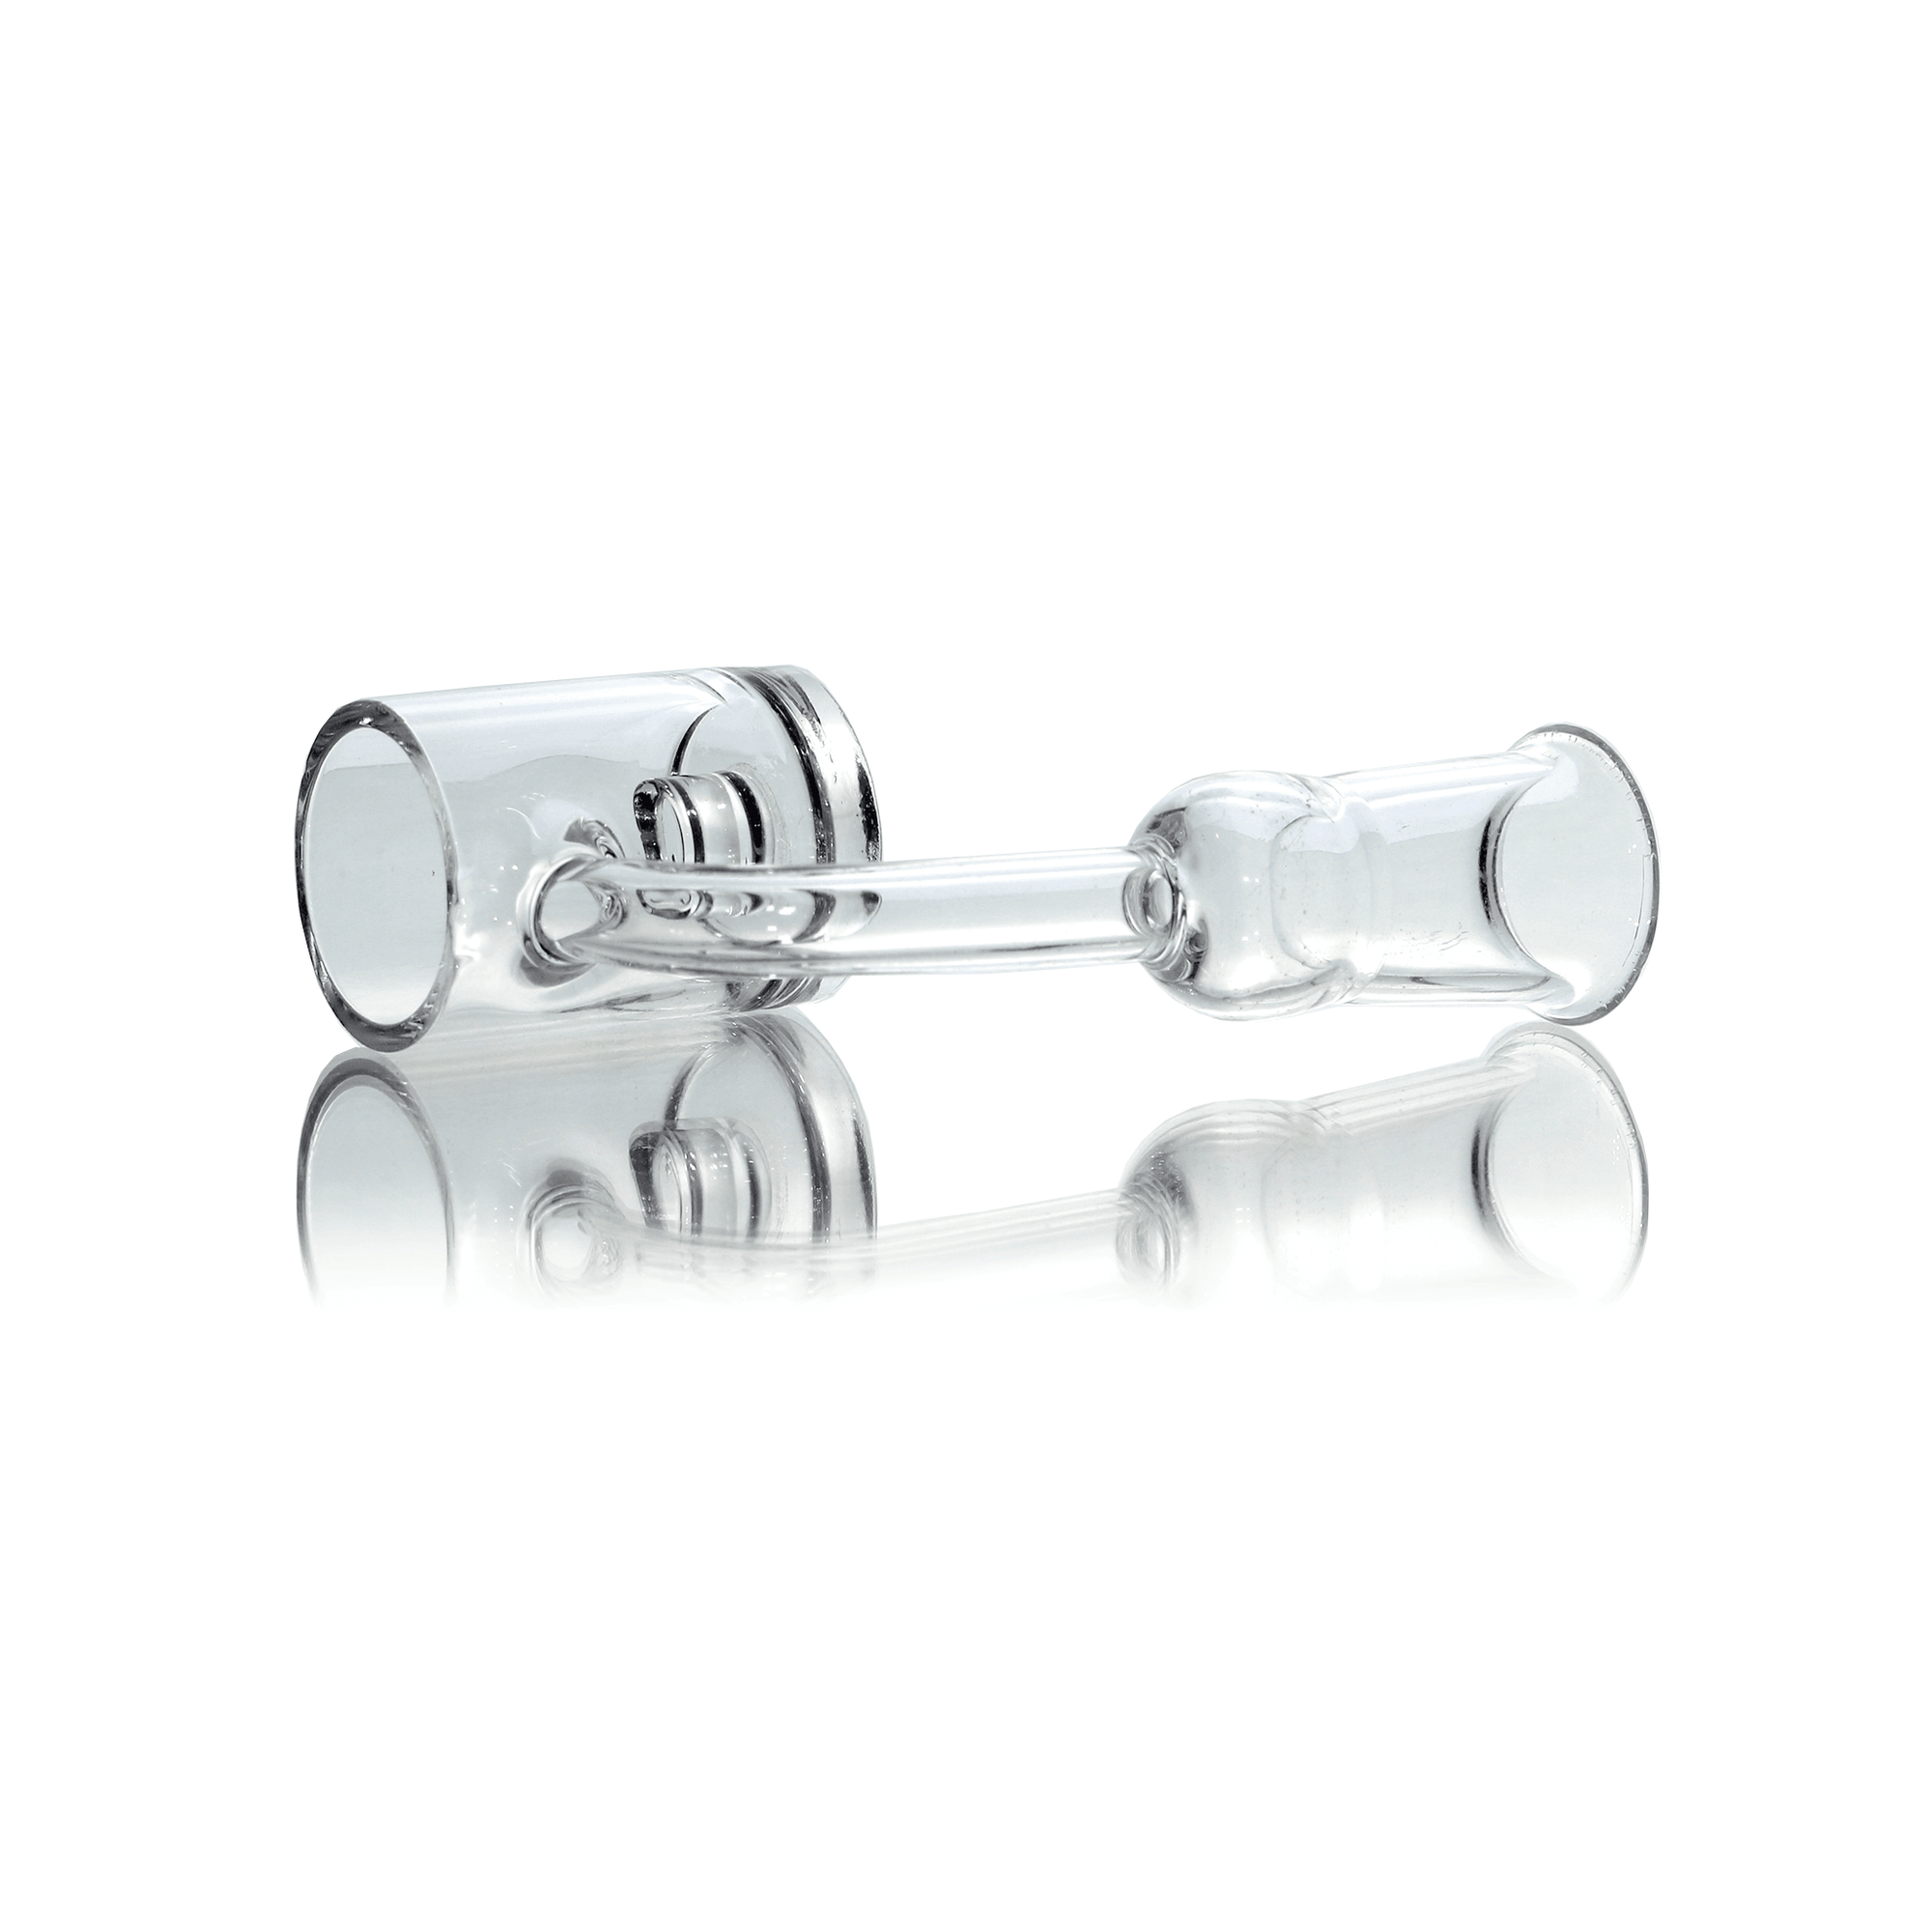 Flat Top Quartz Banger | 14mm Female With Cup Insert & Saucer Cap | Banger Angled Prone View | DW